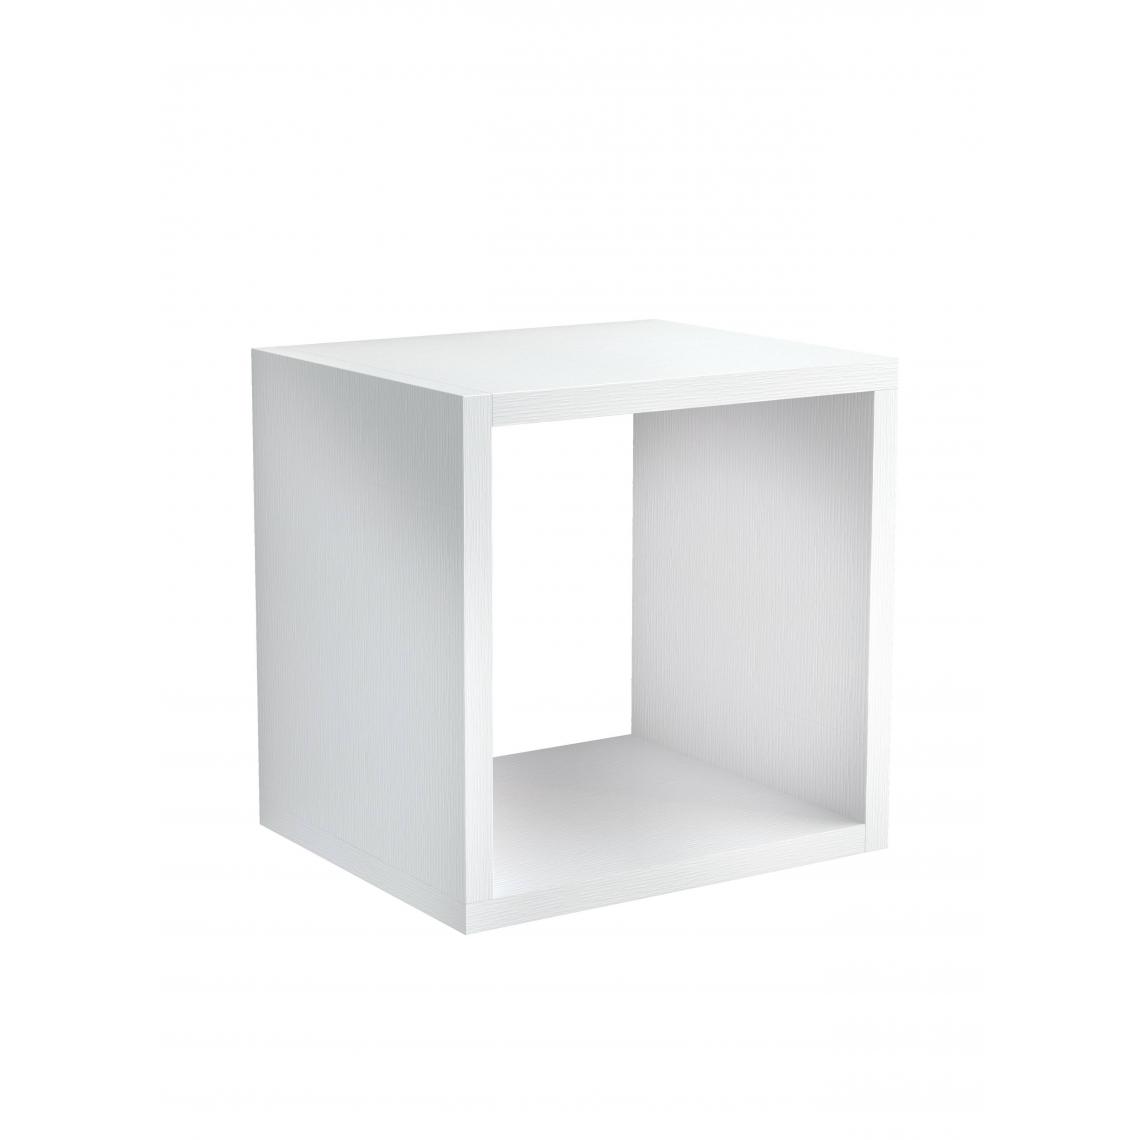 Alter - Cube de rangement modulable, 100% Made in Italy, atagère murale modulable, etagère murale, 30x25h30 cm, Couleur Blanc - Etagères